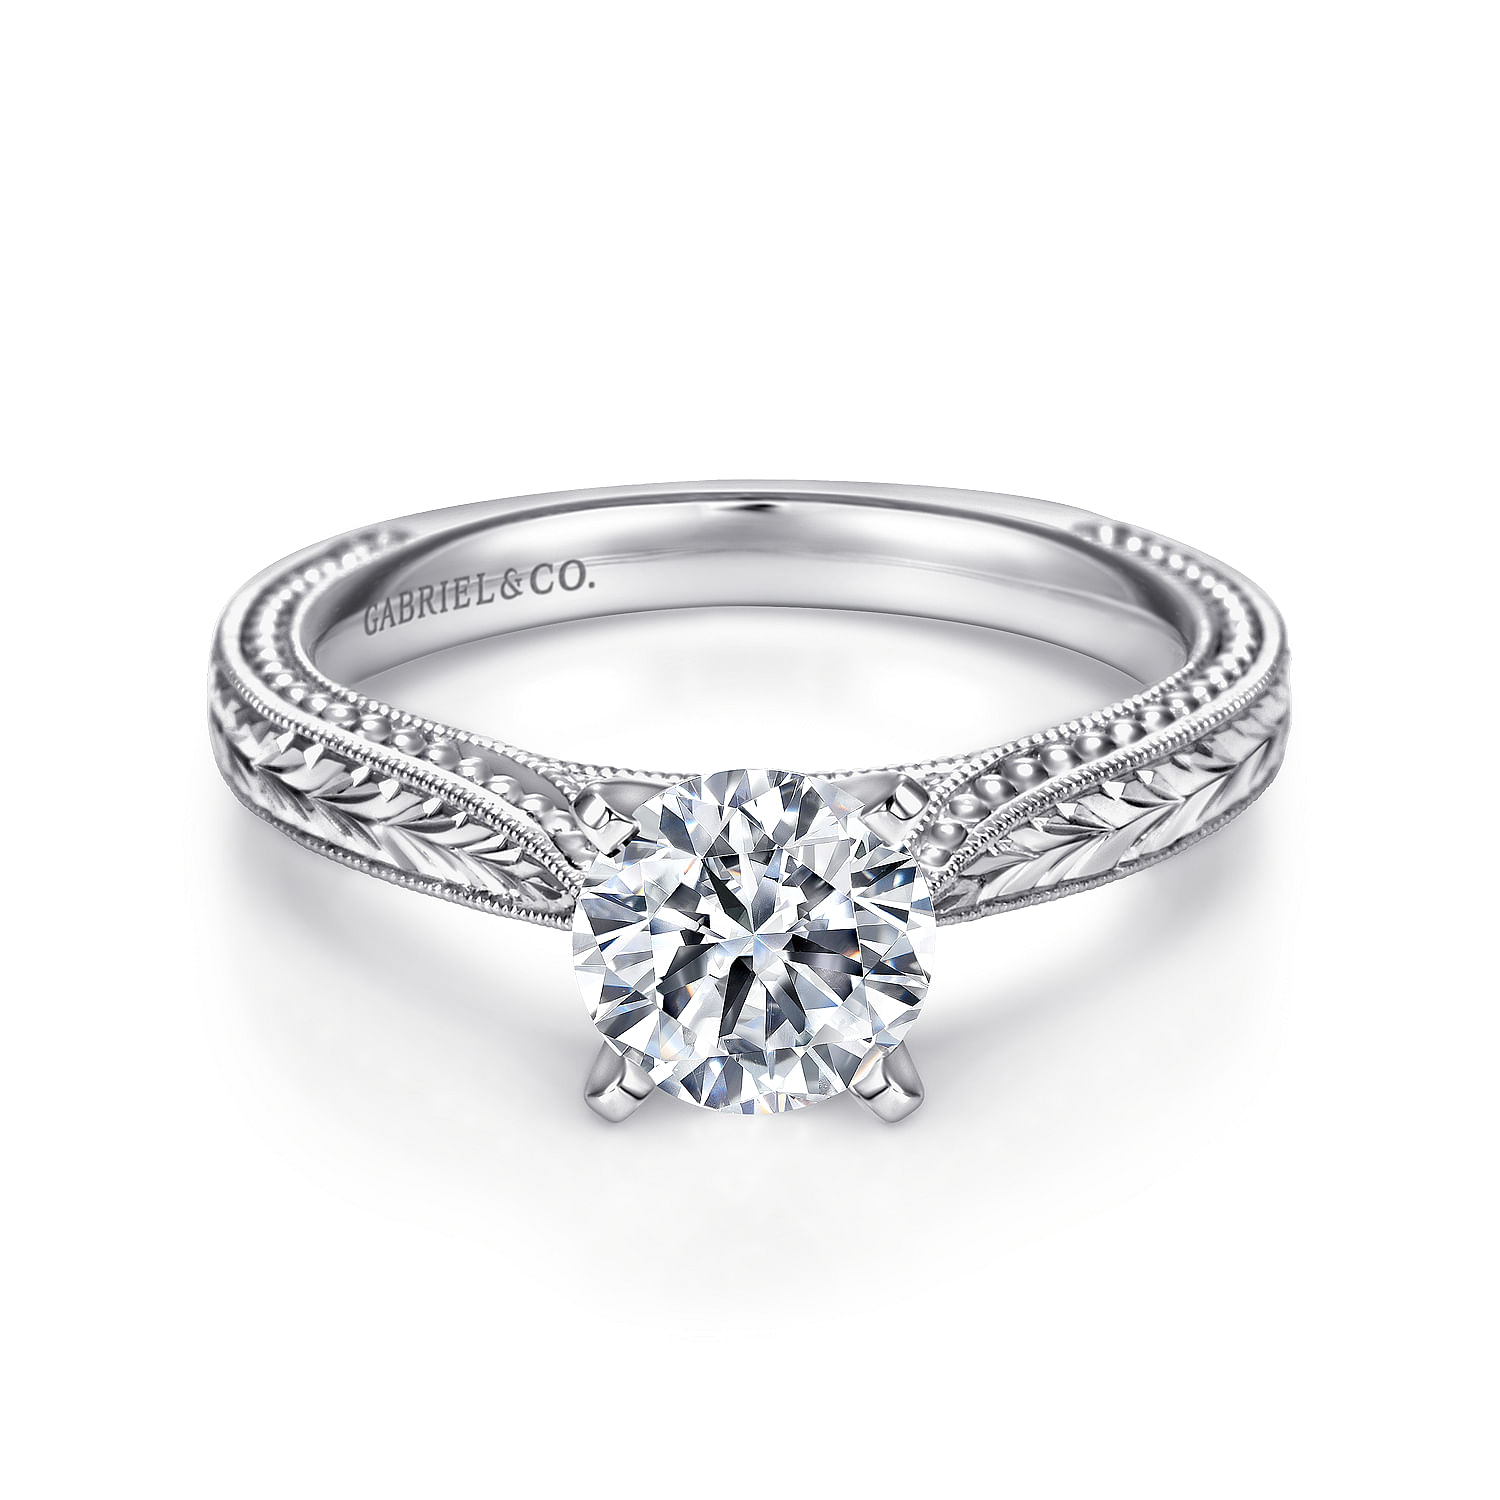 Vintage Inspired 14K White Gold Round Solitaire Engagement Ring